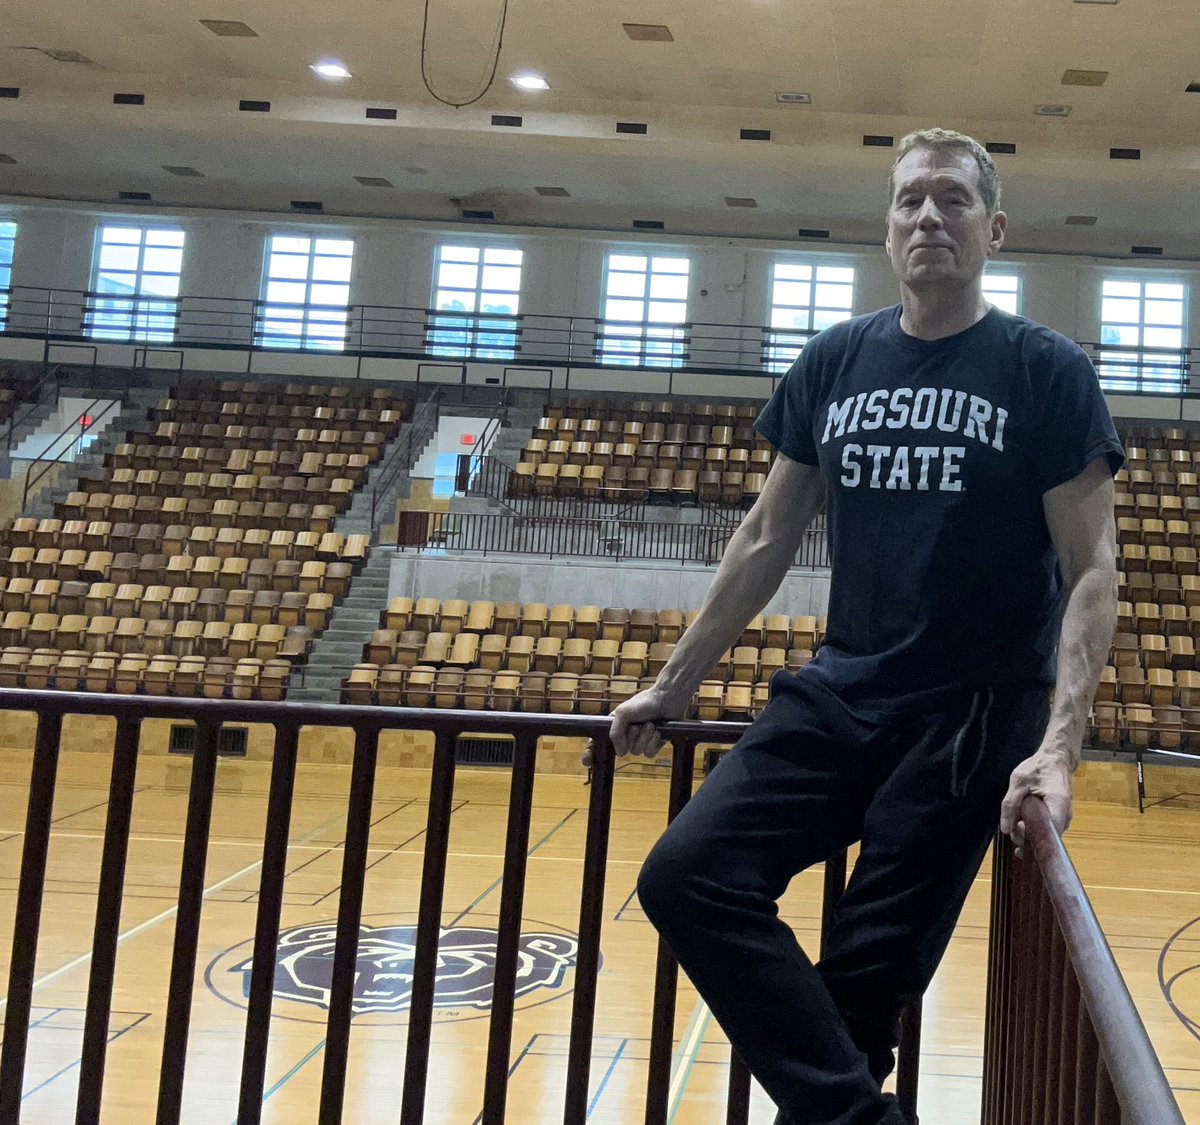 It’s great to be working out at the McDonald Arena at Missouri State University on this rainy day.  In high school I was a gym rat and played basketball here ALL the time. @MissouriState @springfieldmw #missouri